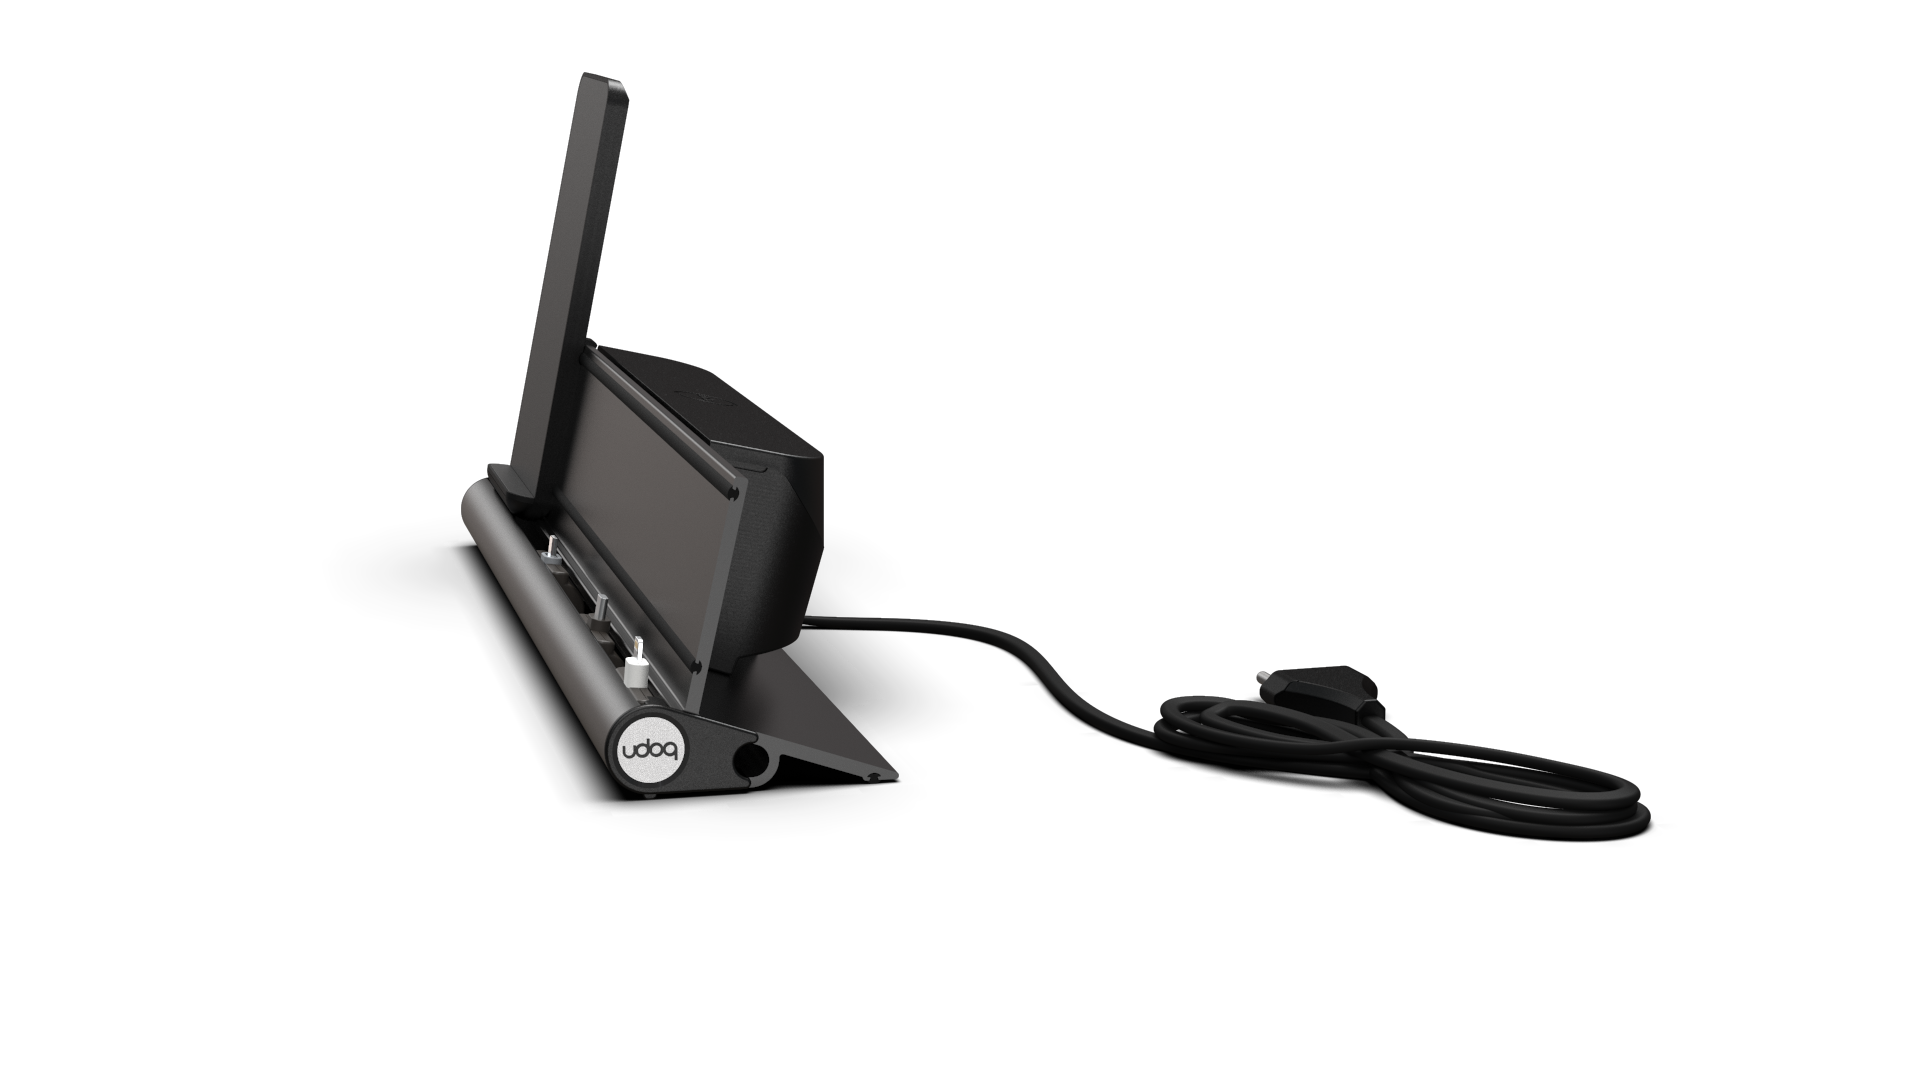 400 multi-charging station in dark gray with wireless adapter and Lightning